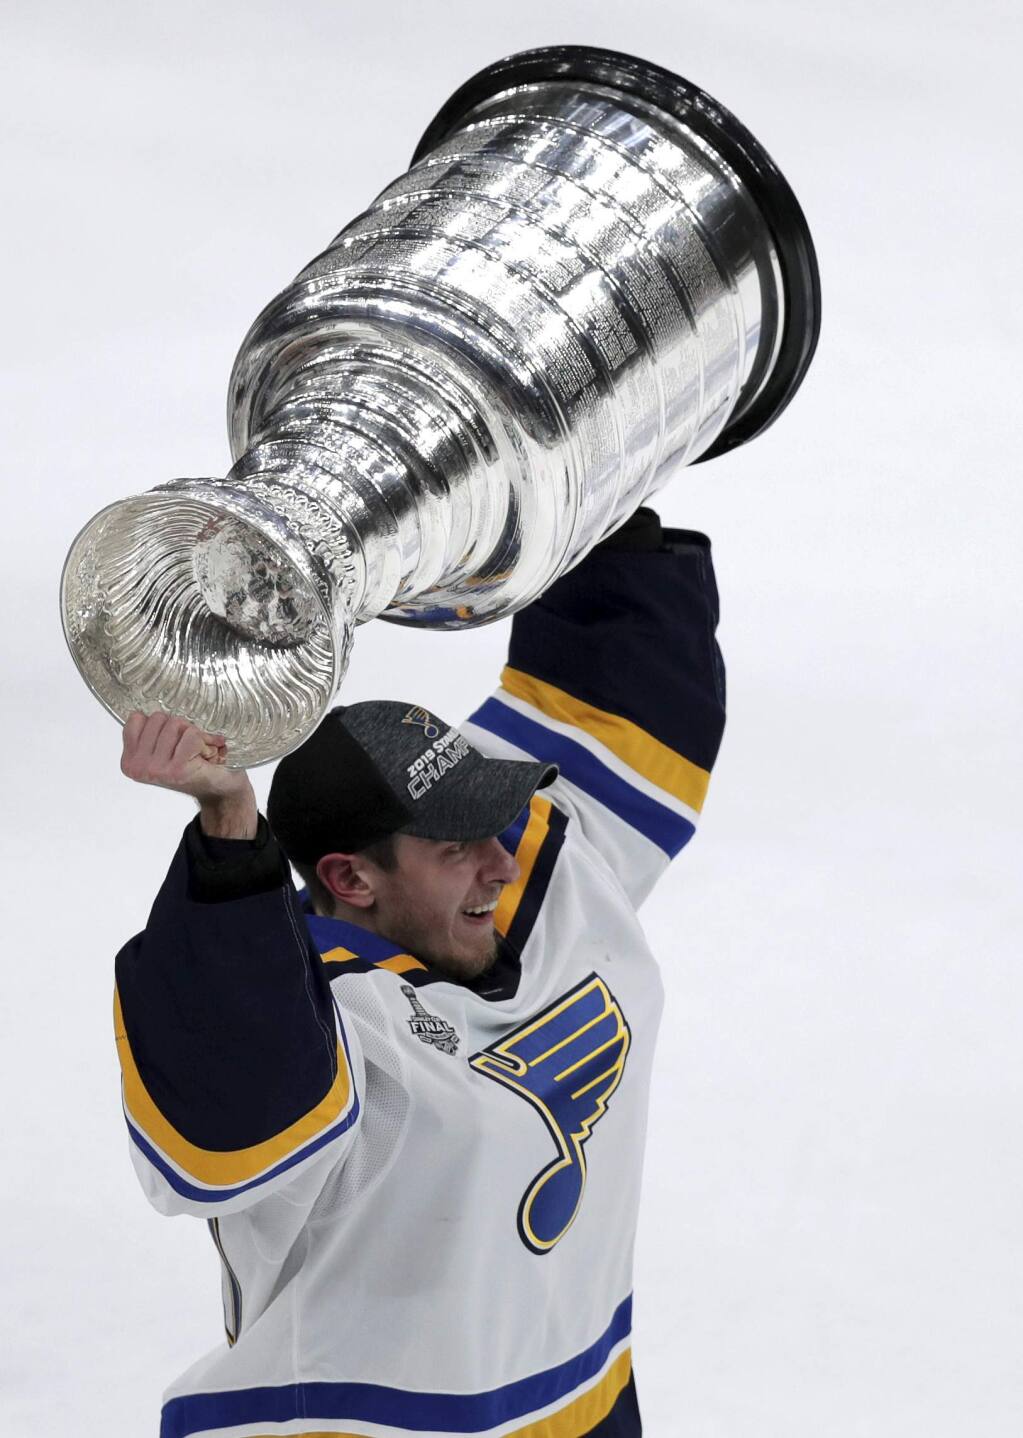 Stanley Cup Final: Blues' Sanford ready to play childhood team Bruins -  Sports Illustrated